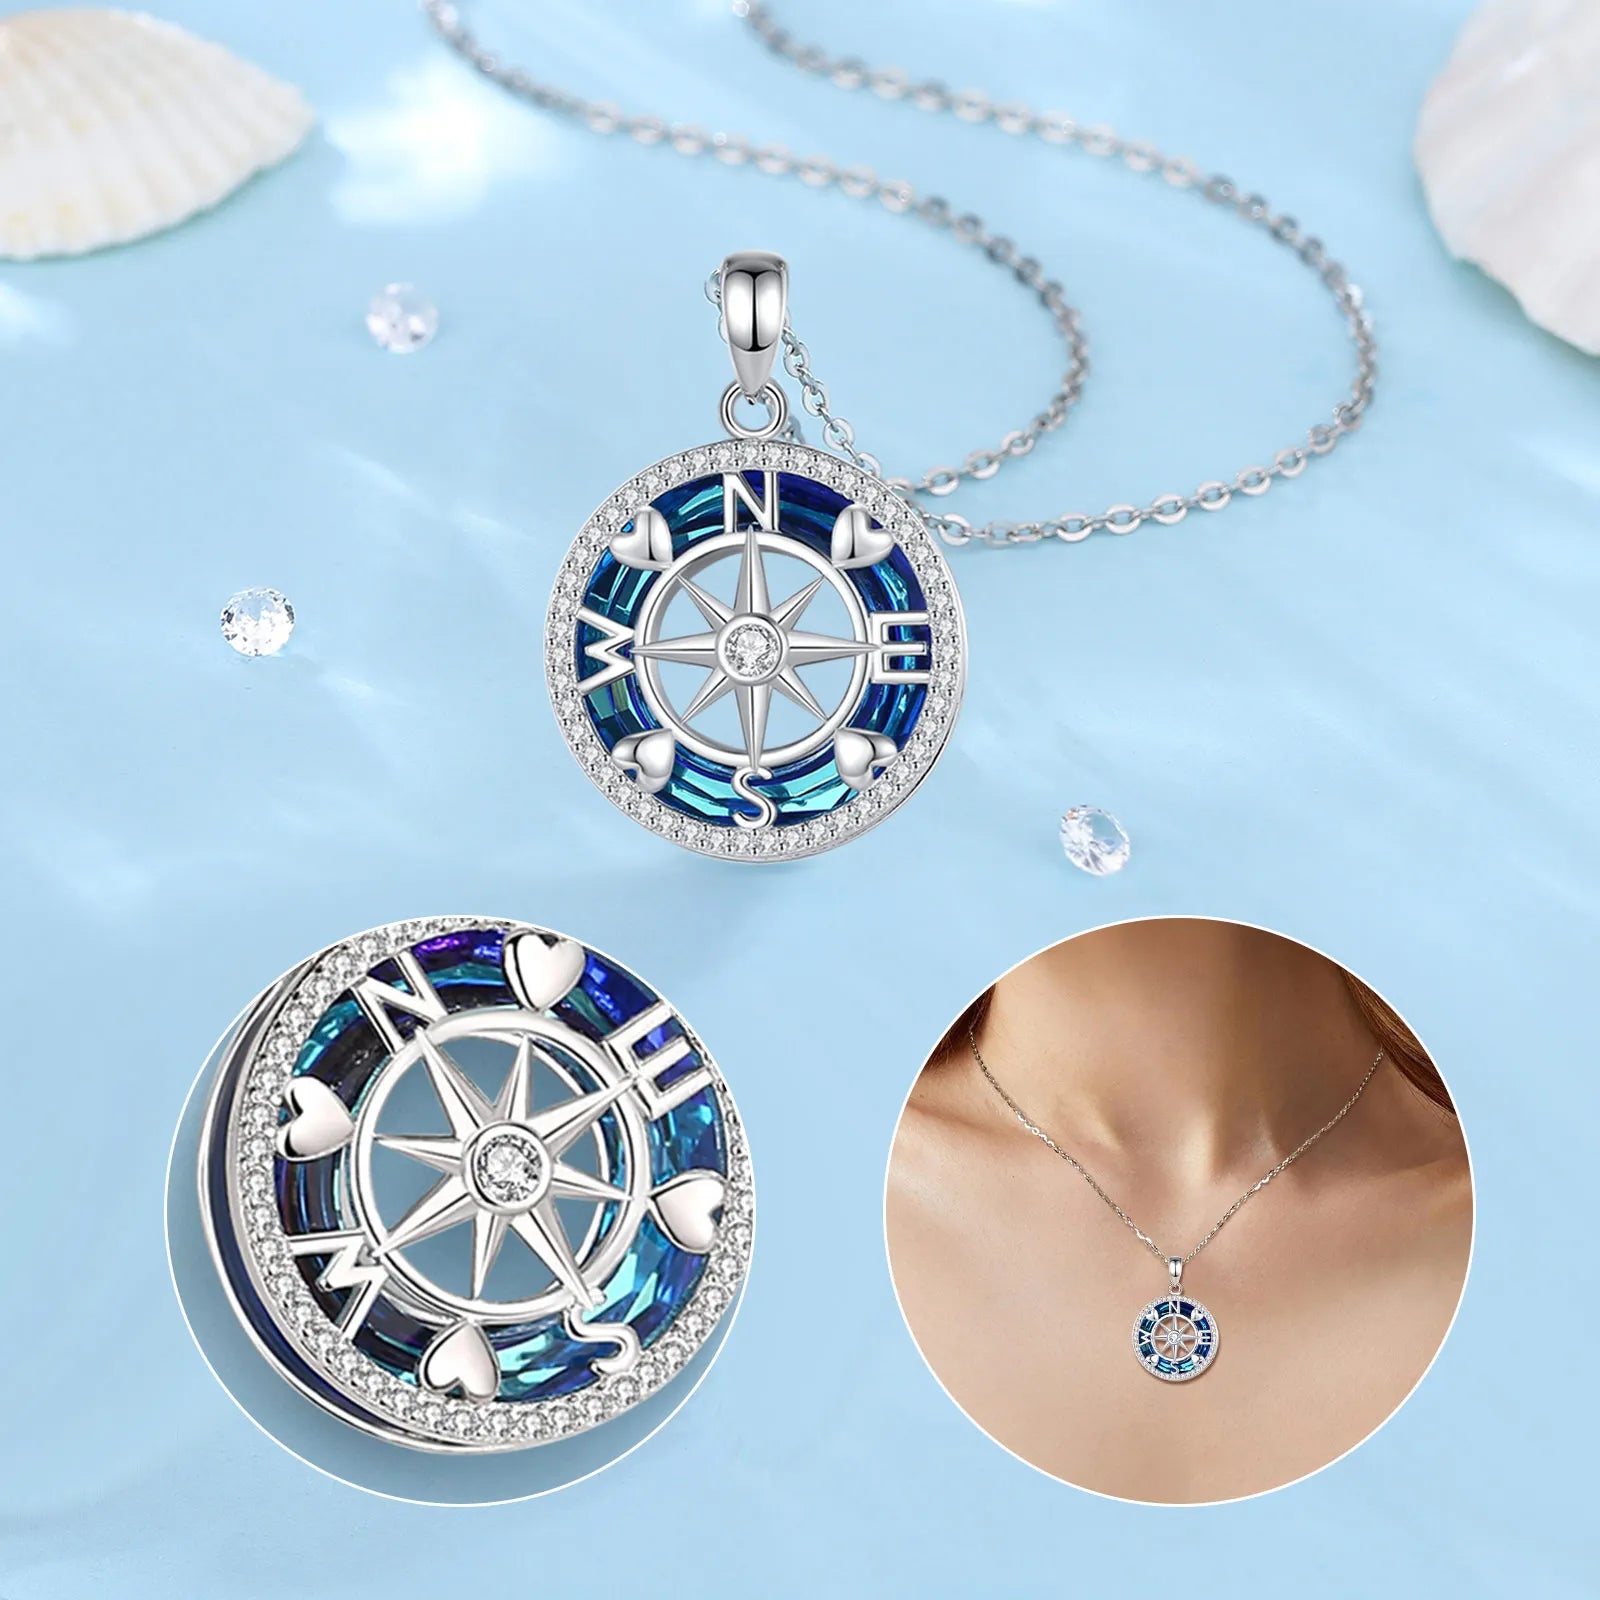 Sterling Silver with Austrian Crystal Compass Pendant Necklace - Madeinsea©